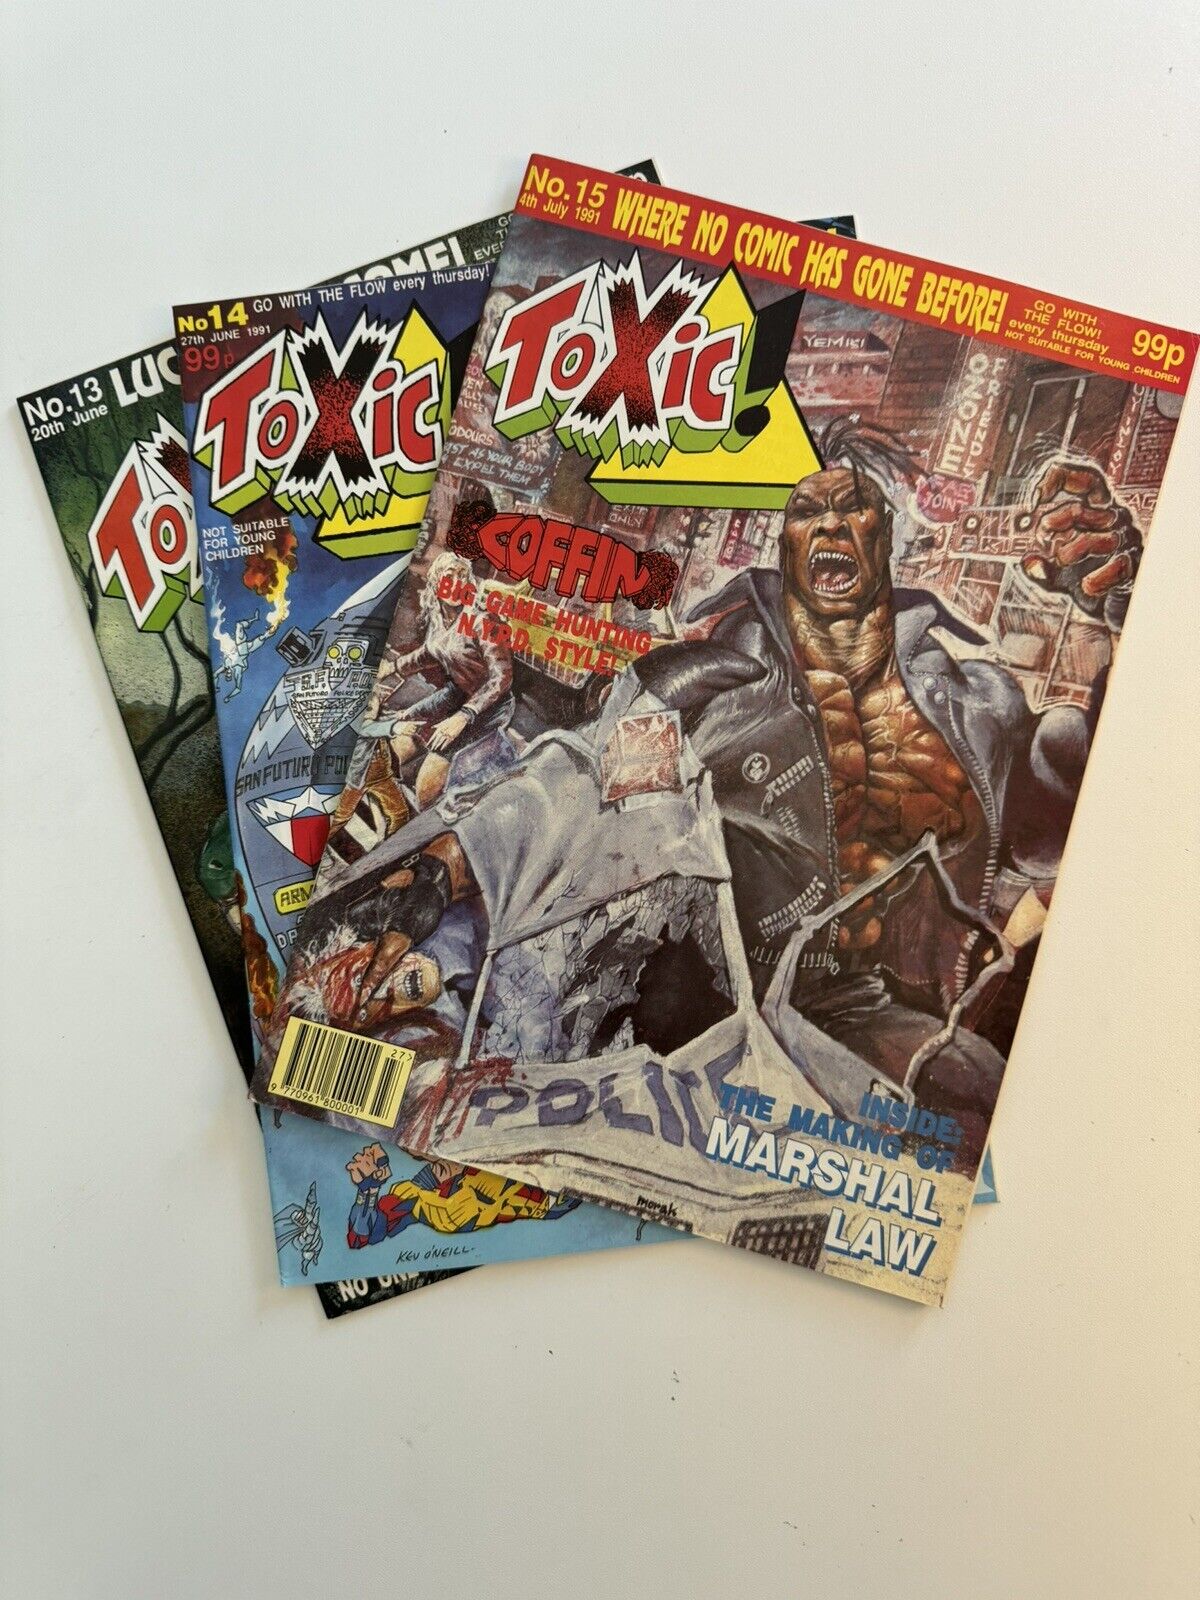 TOXIC #13 14 15 - 1991 Issue - Lot of 3 Magazines